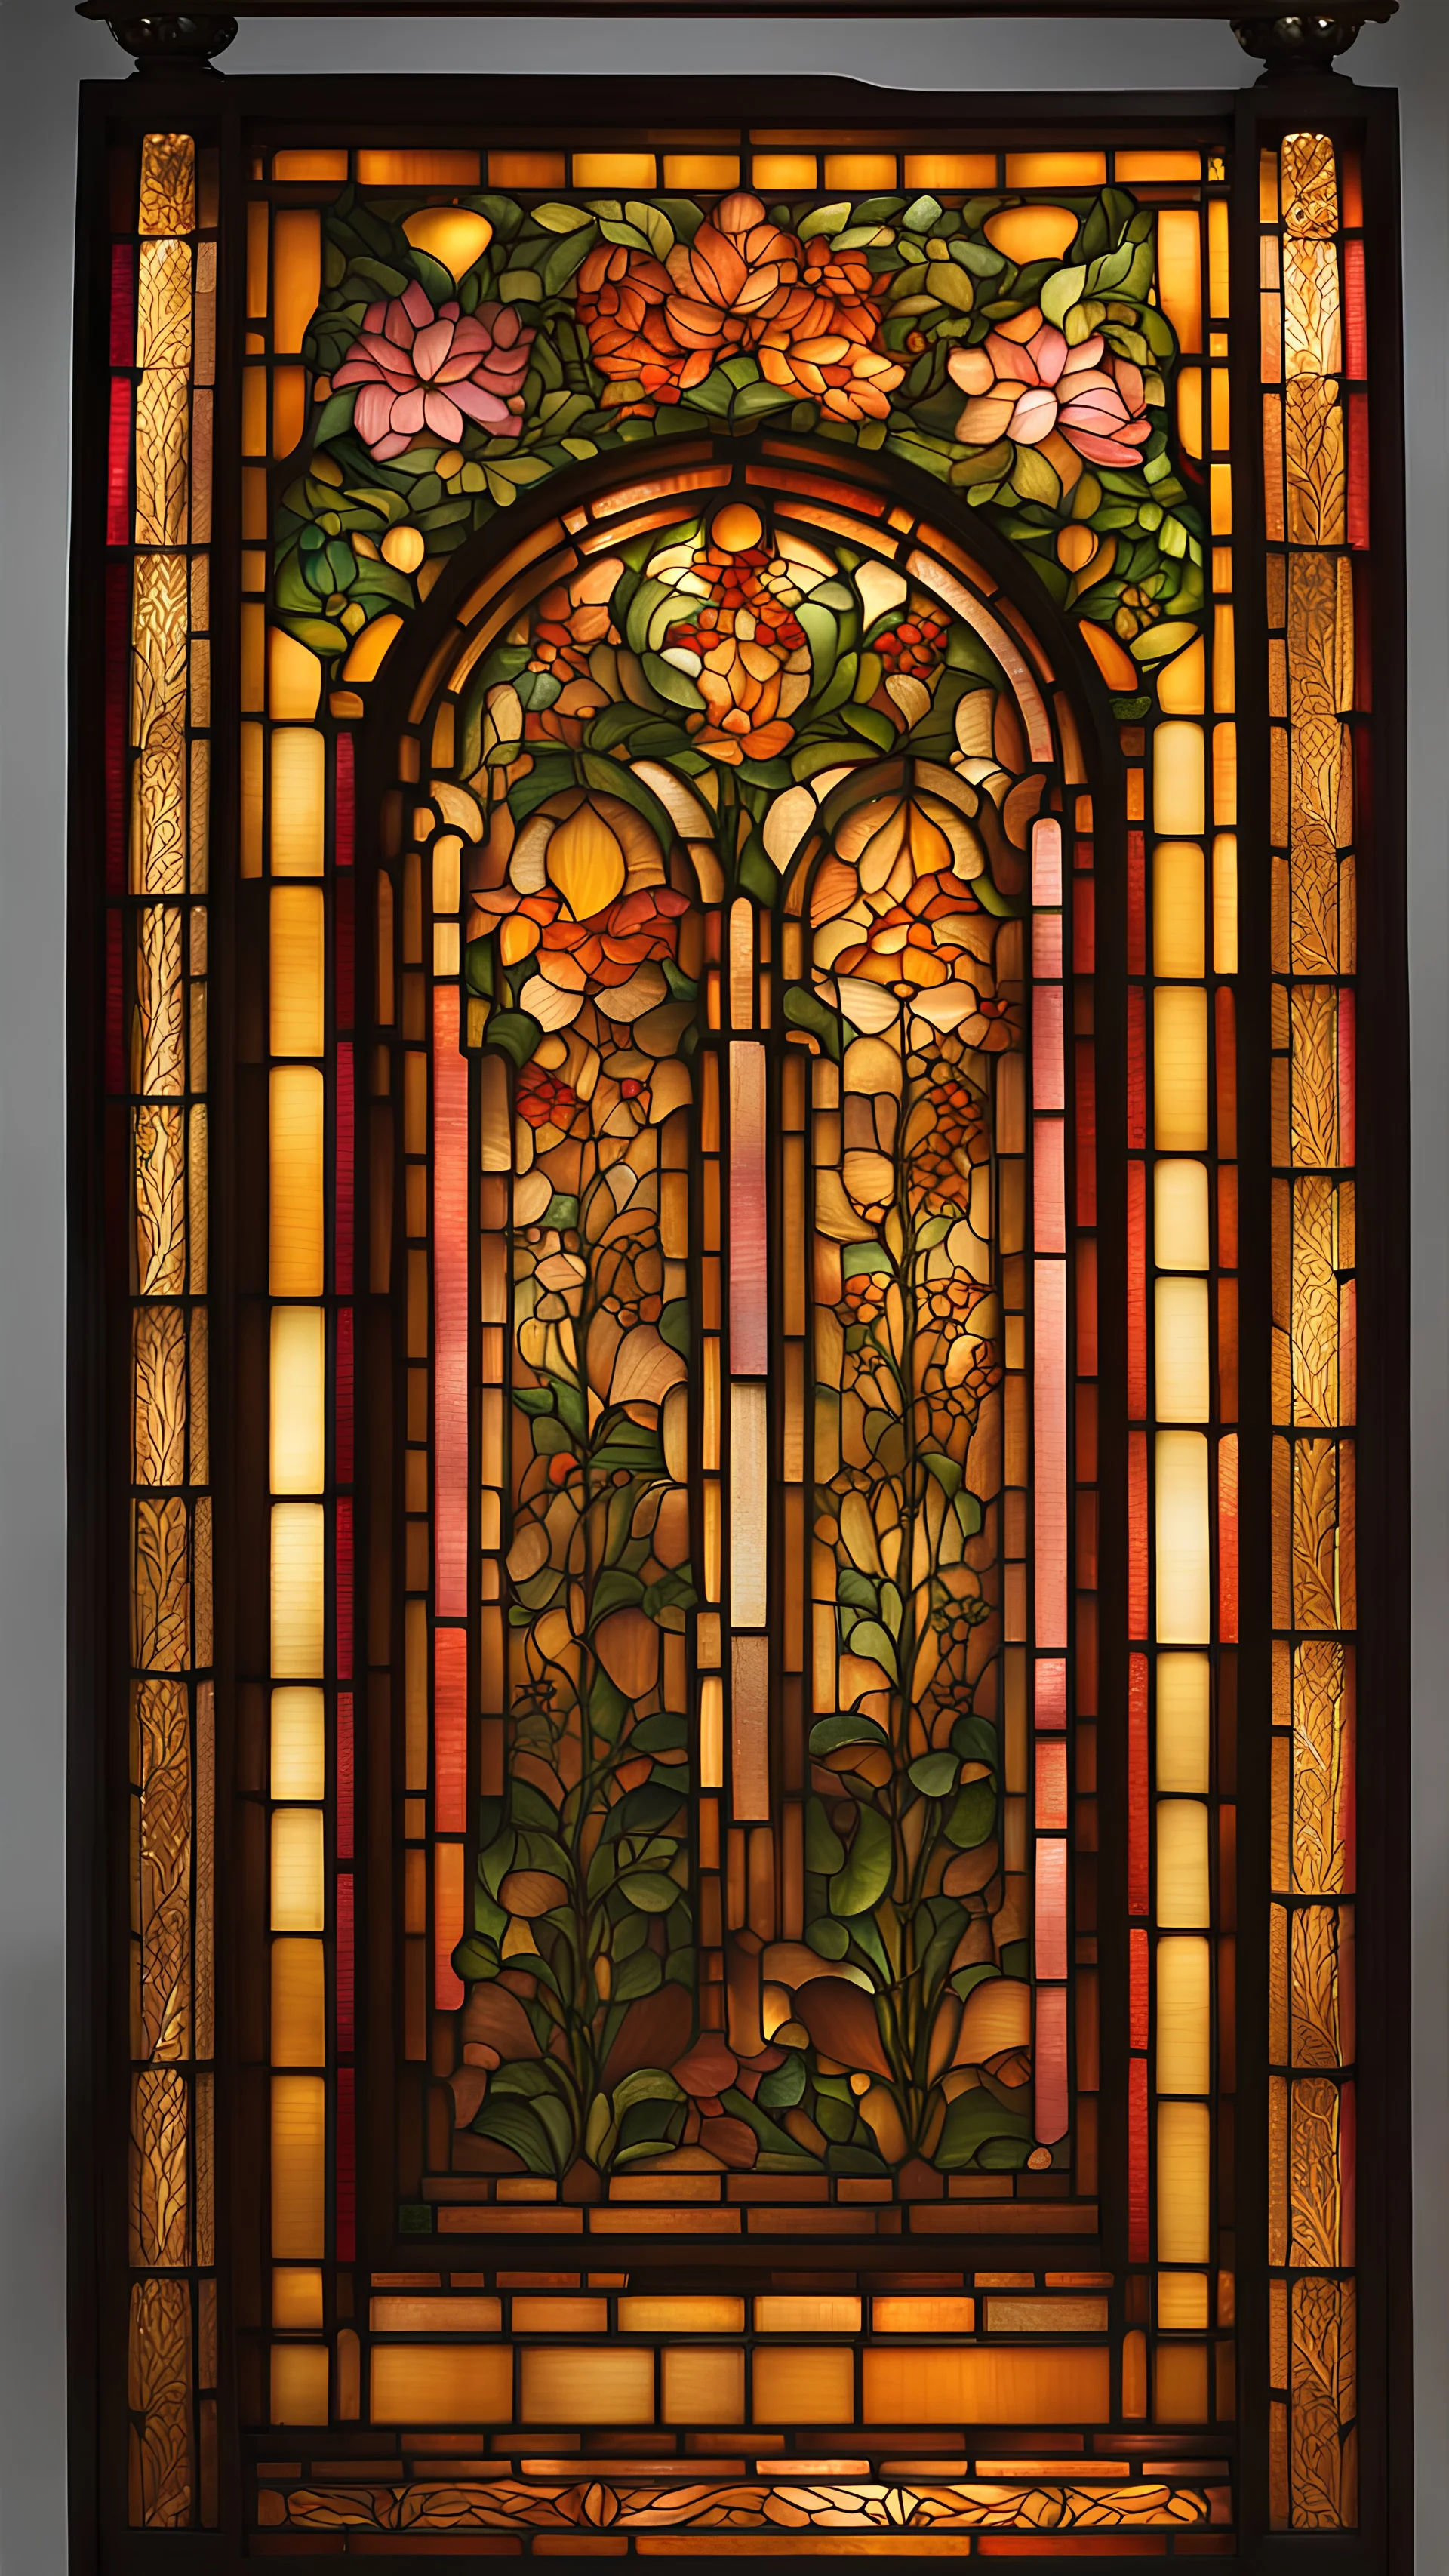 The image depicts a tall, narrow stained glass panel with an intricate, nature-inspired design. The panel is framed in ornate, golden-colored wood with detailed carvings at the top and bottom. The central motif of the stained glass features a variety of blooming flowers, including pink and orange hues, with lush green stems and leaves winding their way up the length of the panel. The background consists of softly muted blue and beige tones, arranged in geometric patterns that contrast with the o